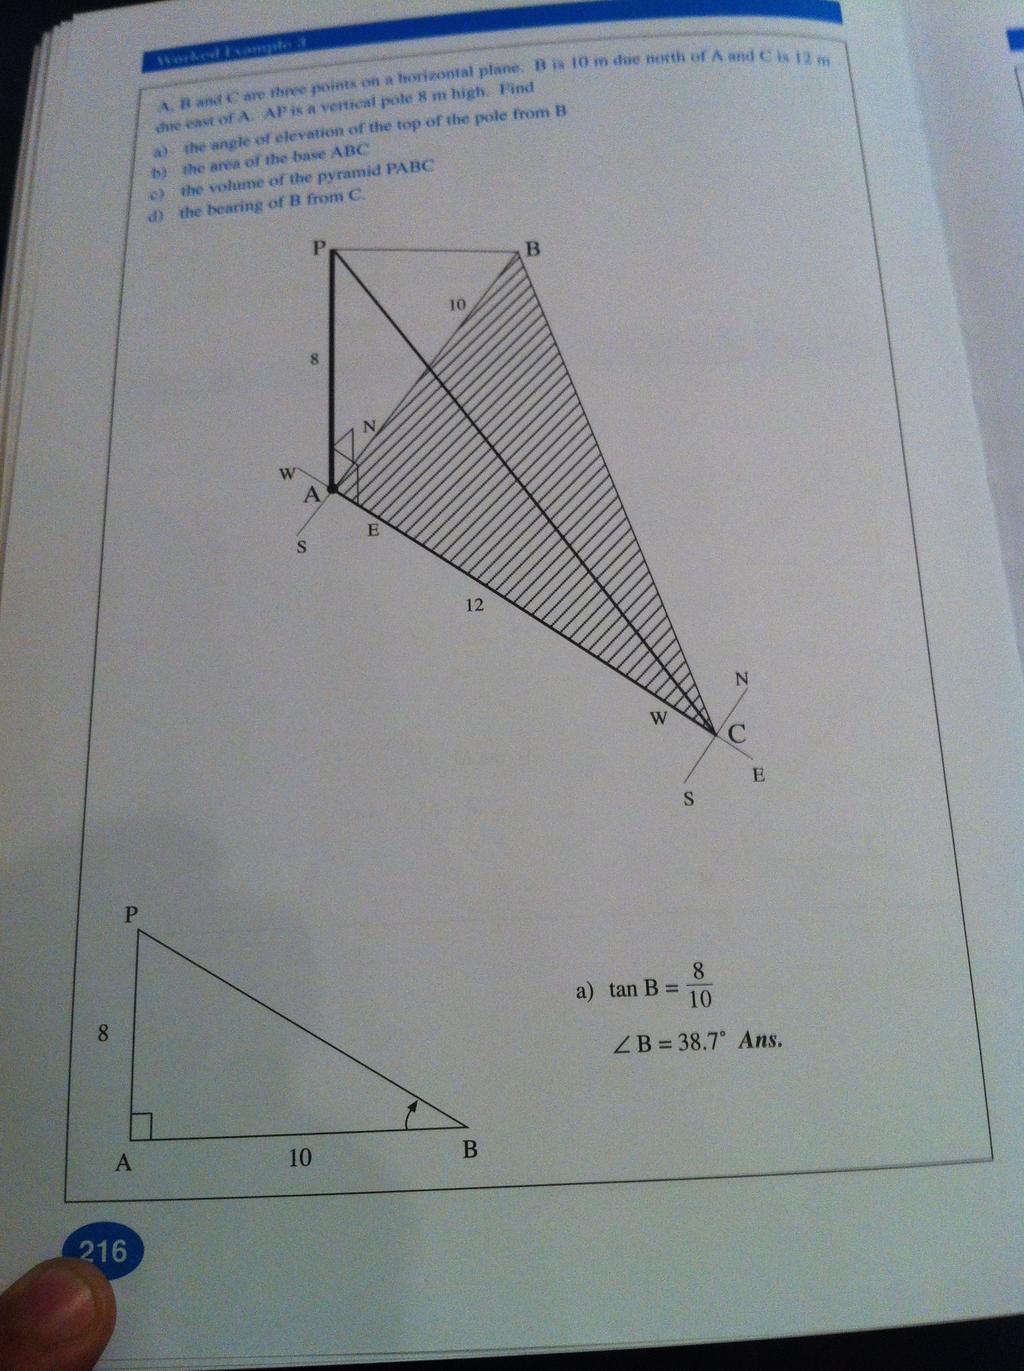 Triangles & Trigonometry 2A Example 2: A, B and C are three points on a horizontal plane.